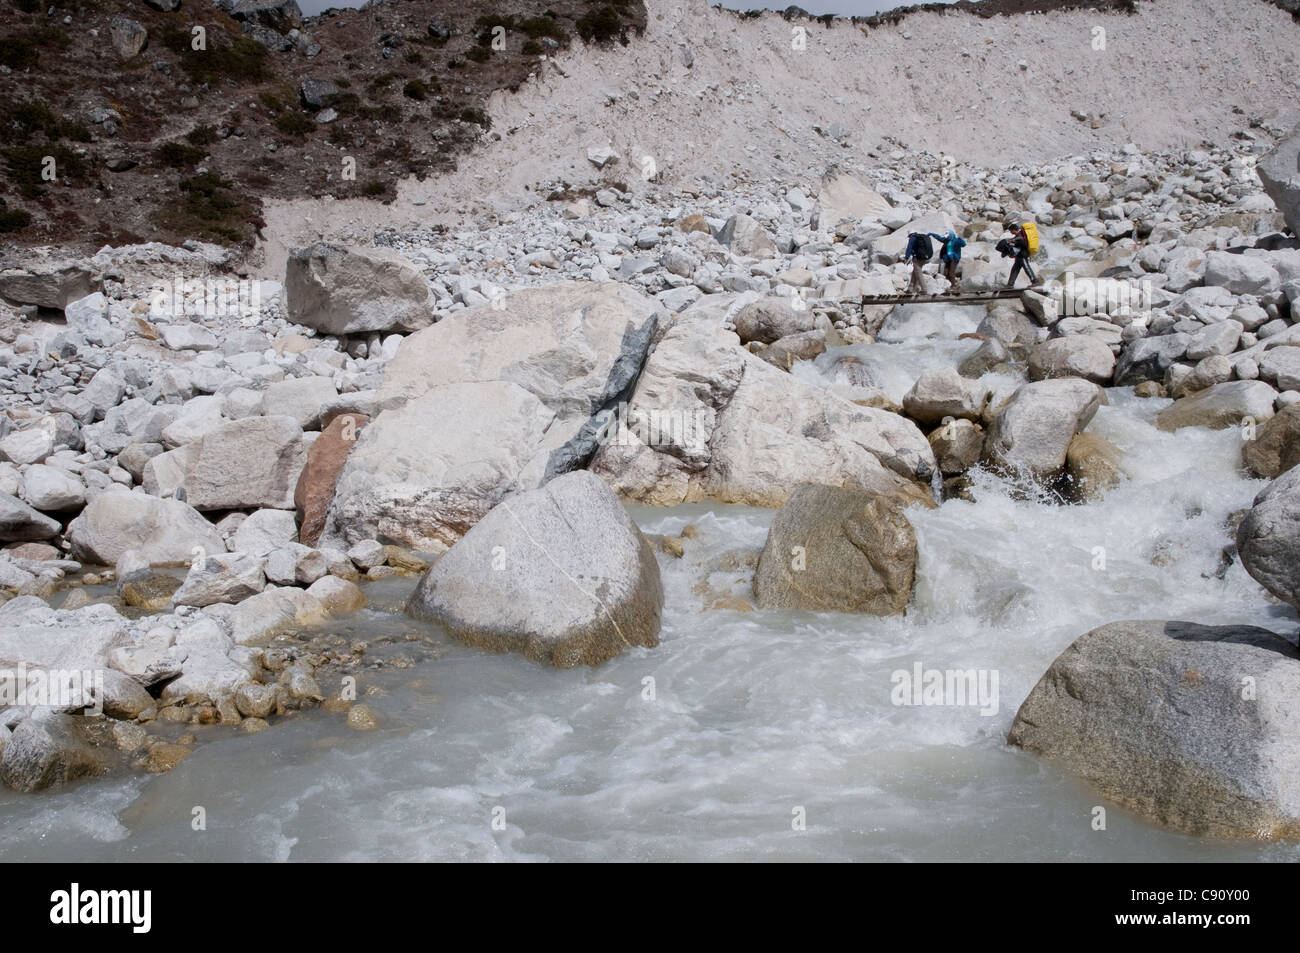 The rivers of the Solu Khumbu are fast flowing with meltwater running off the high peaks of the region. Stock Photo